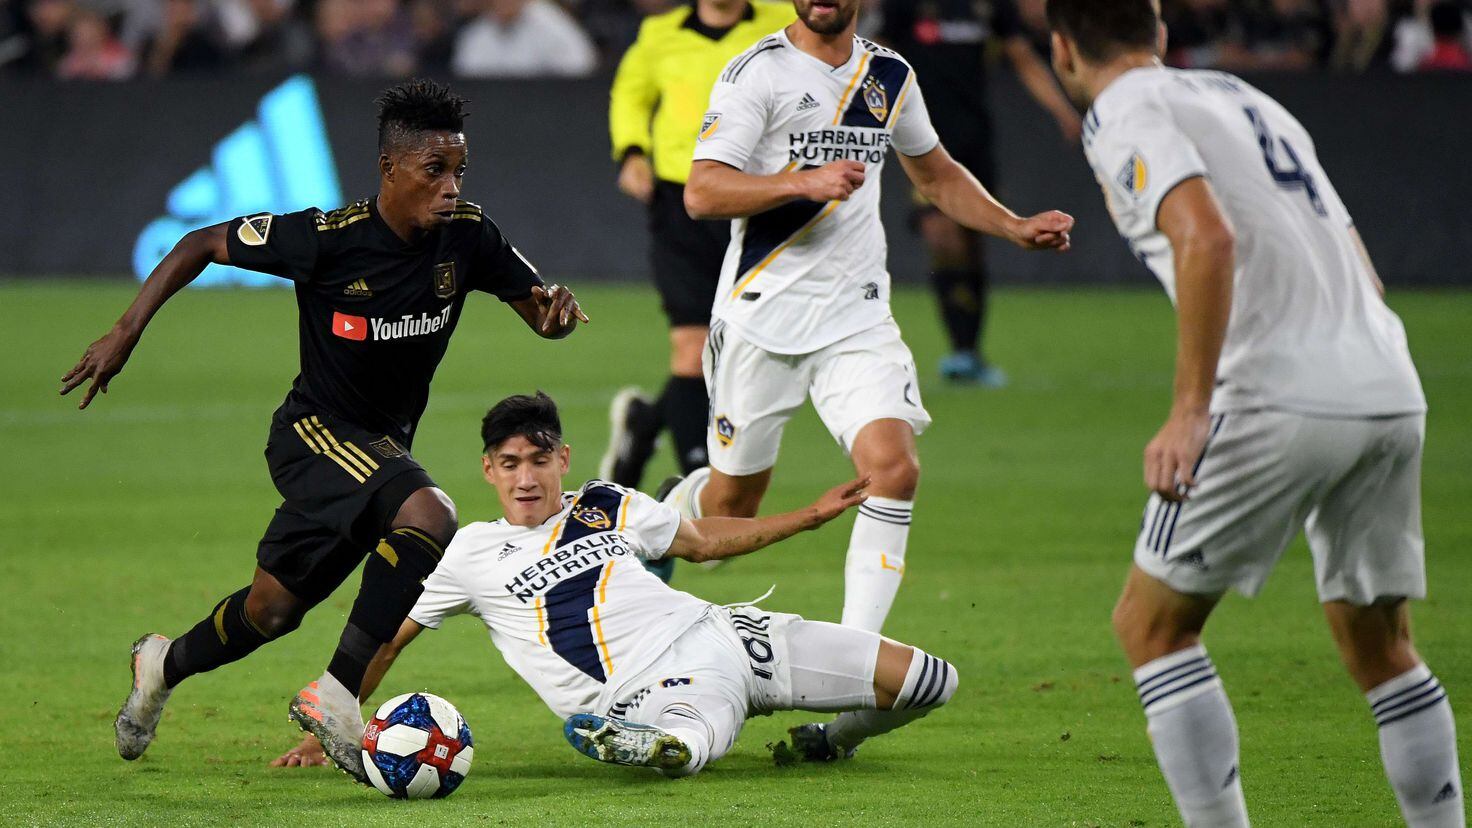 L.A Galaxy vs LAFC how many times have they faced each other and who